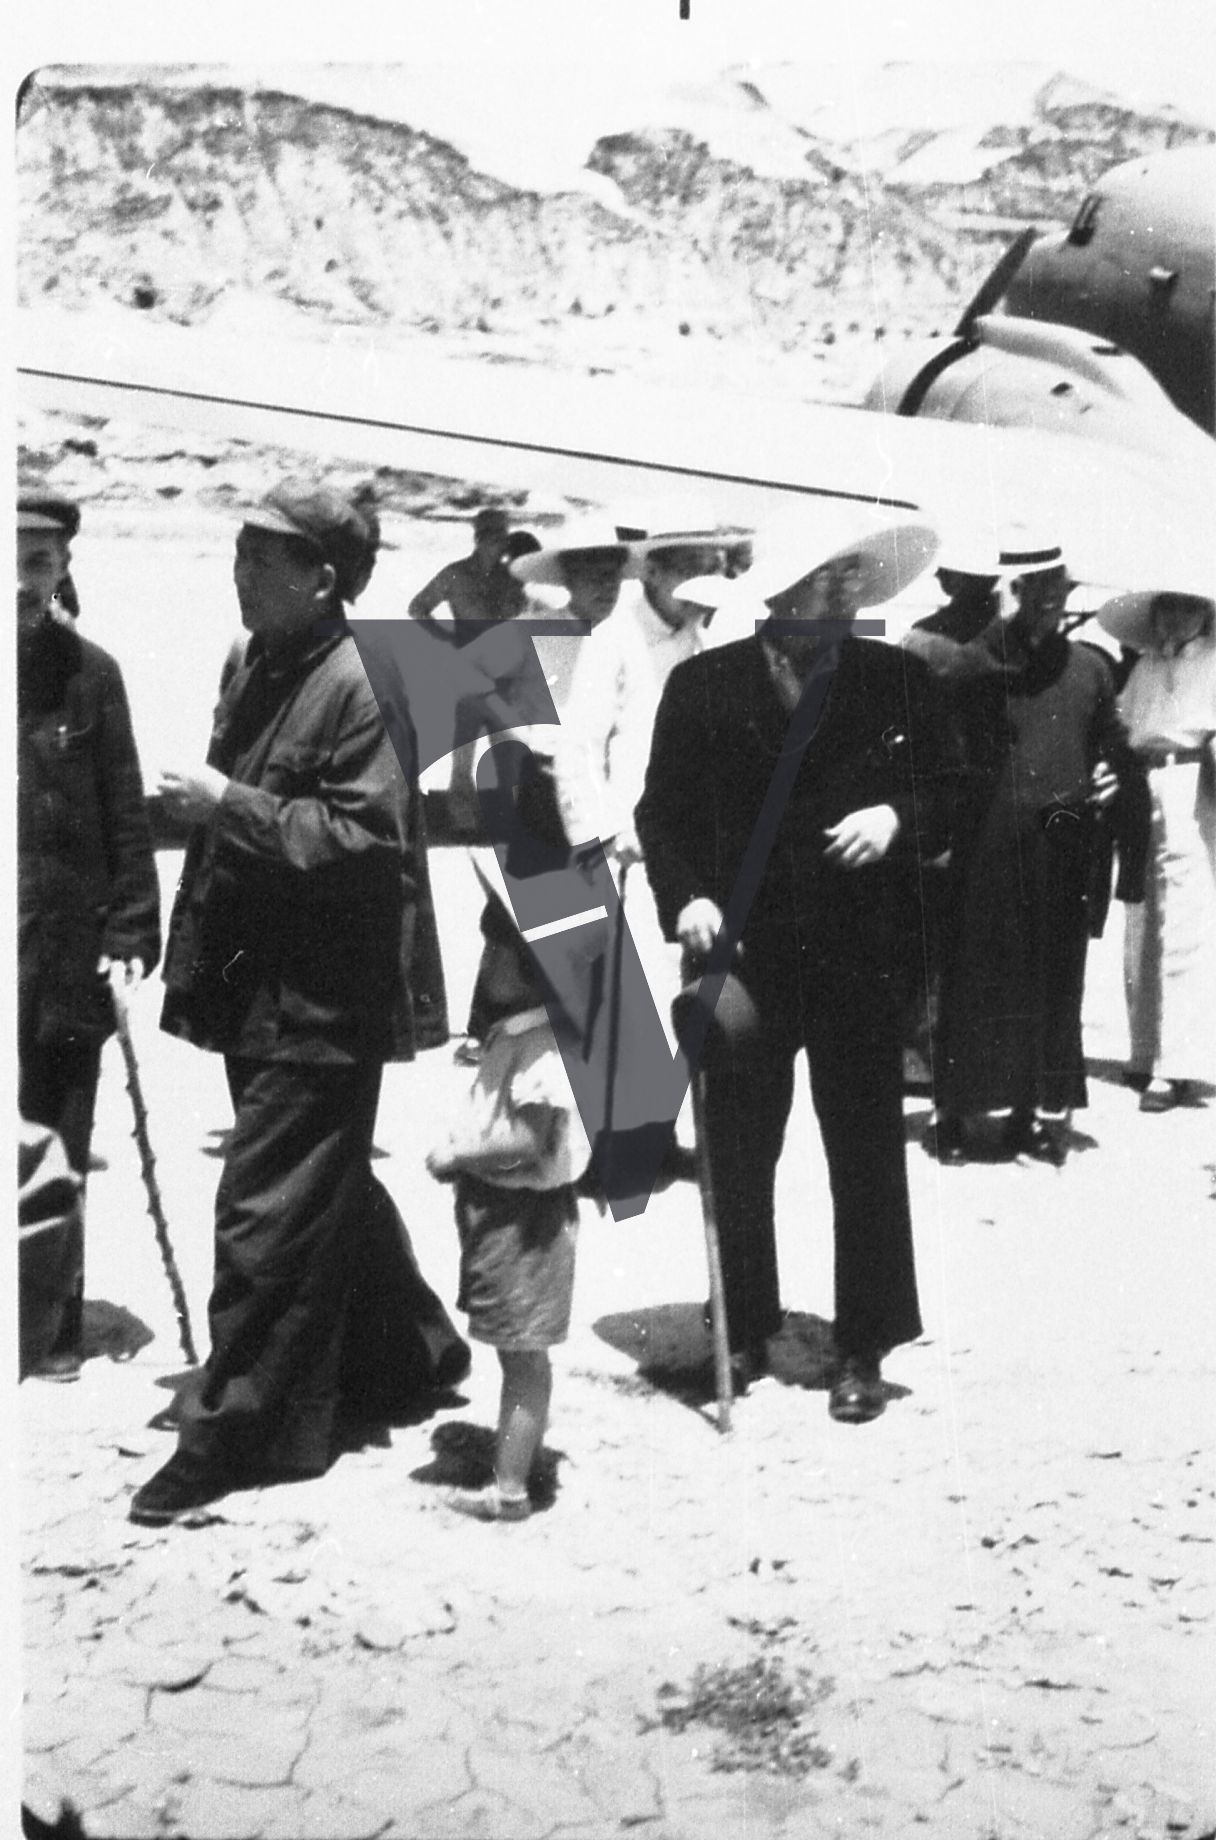 China Yenan, Mao Zedong with daughter, Chinese officials, entourage, plane, landscape, full shot.